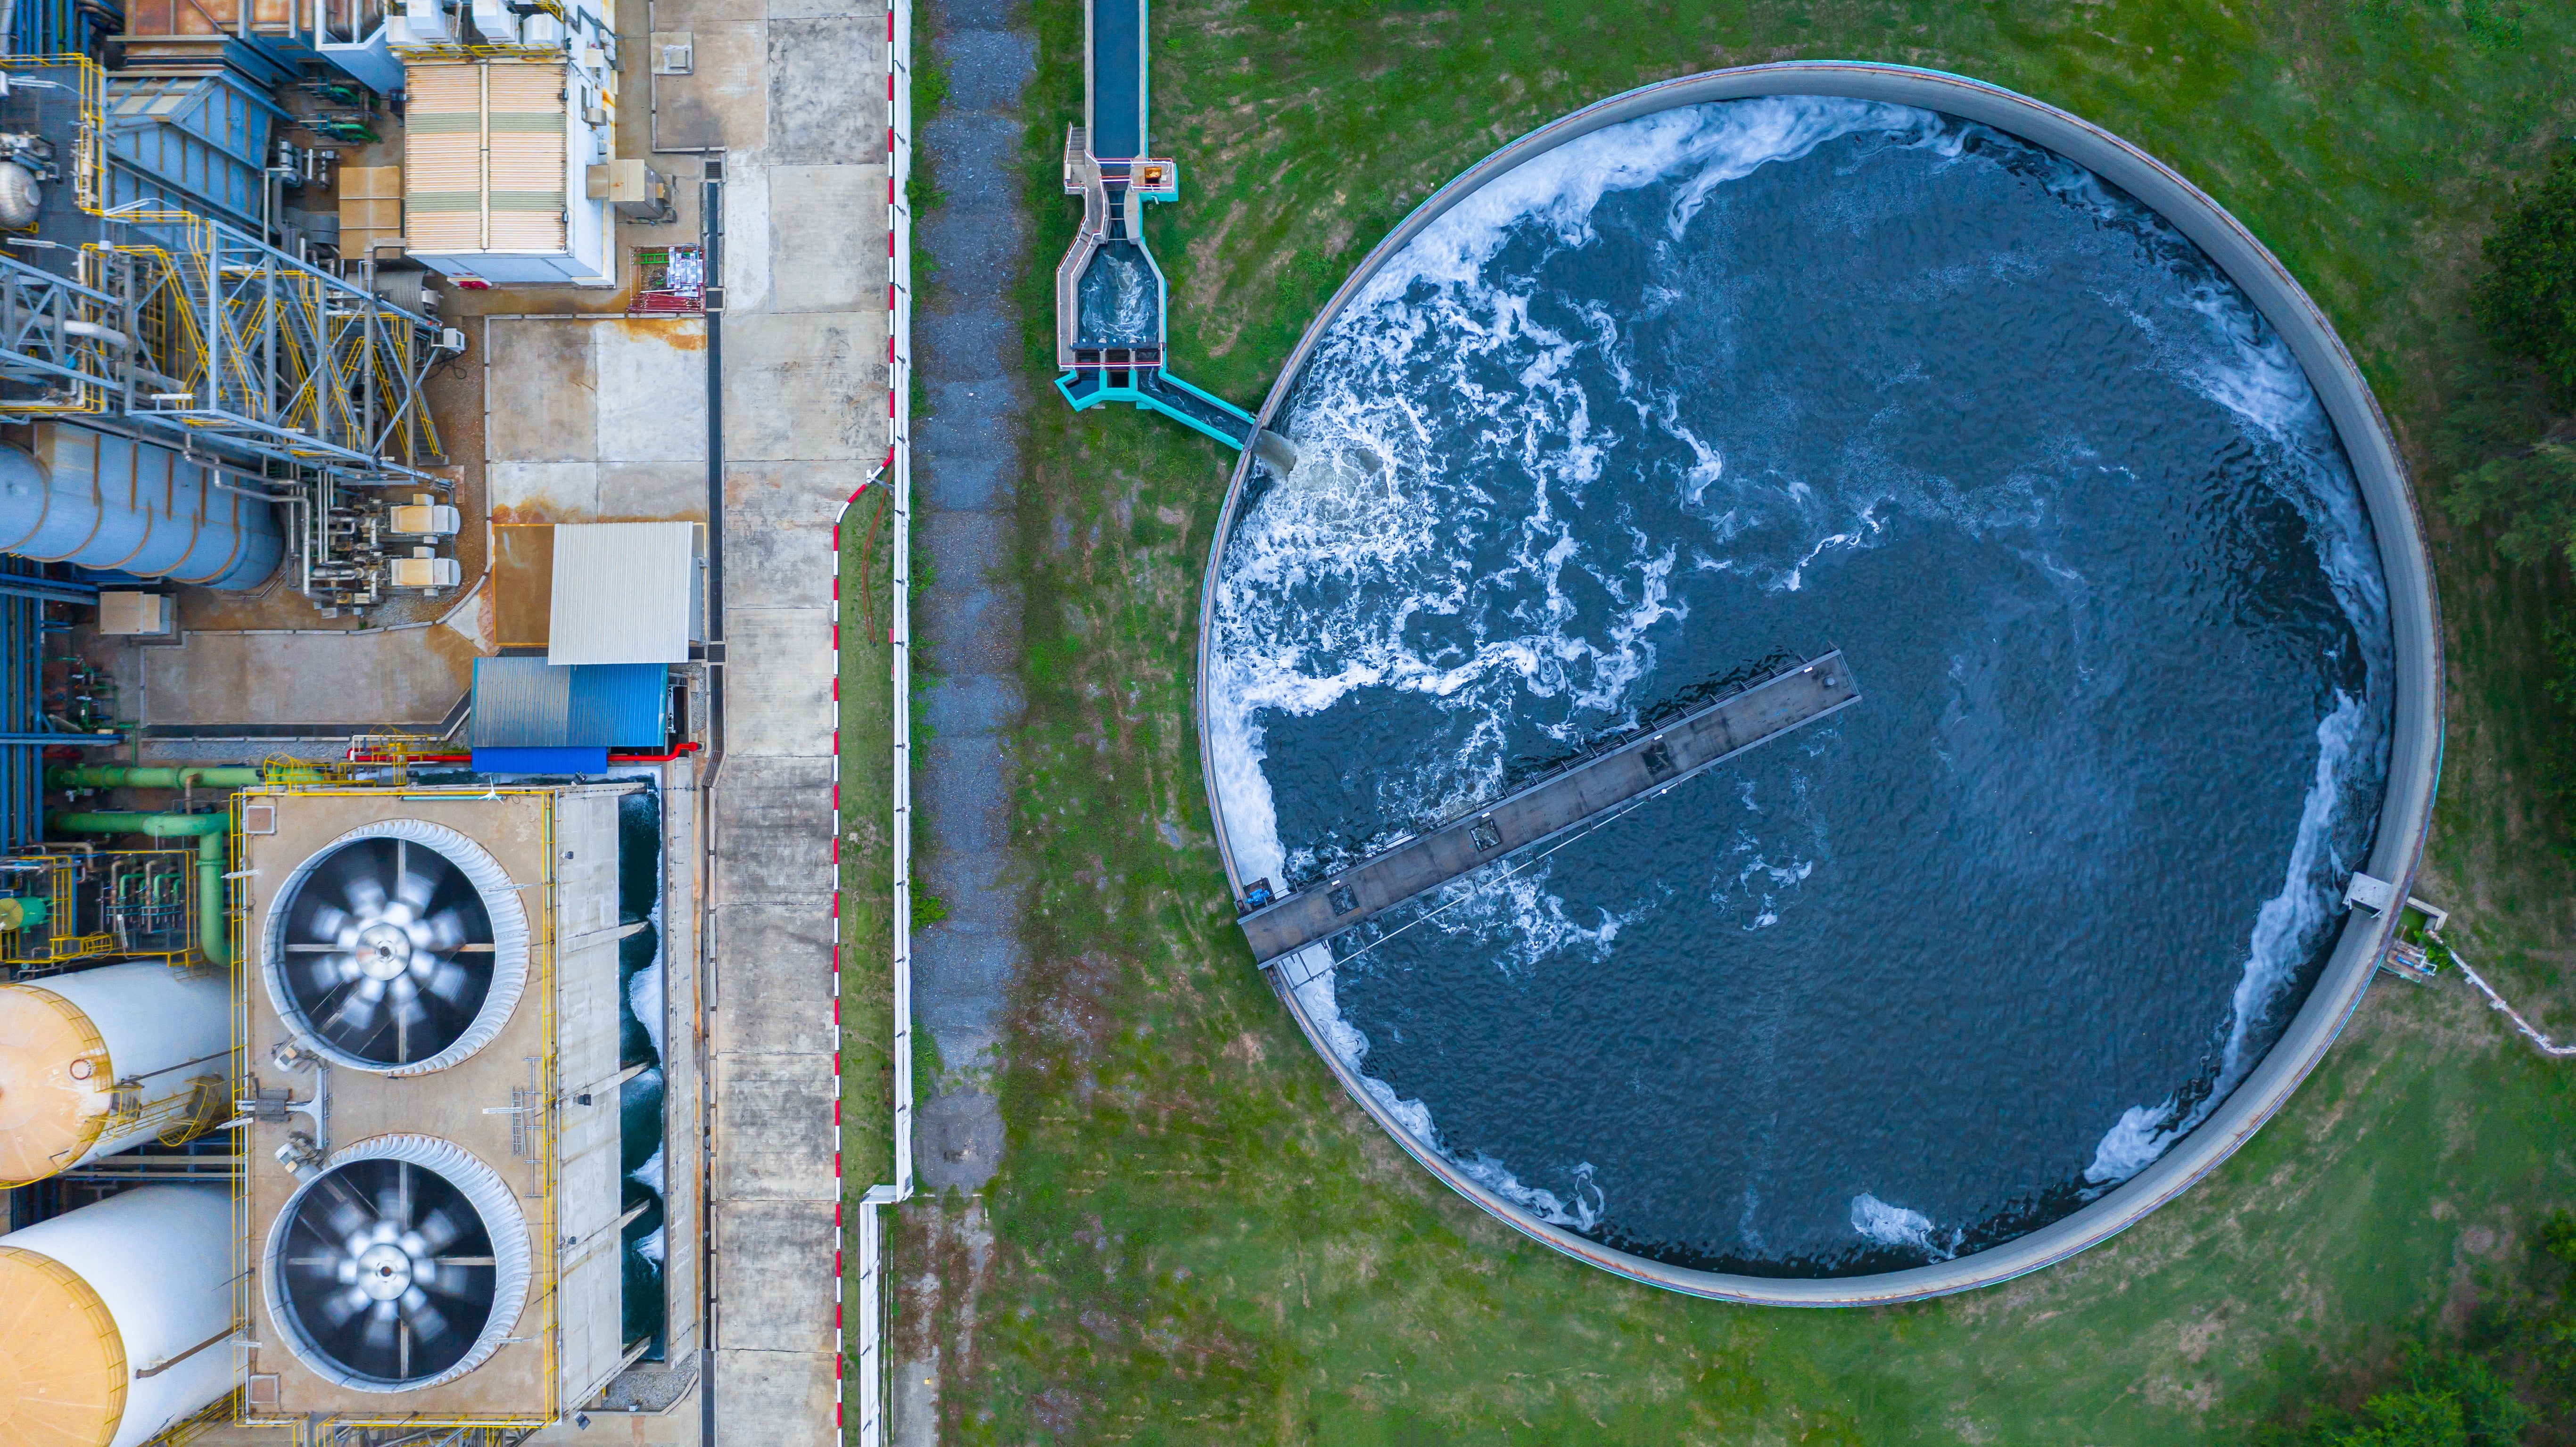 The Poop Graveyard: Touring A Wastewater Treatment Plant